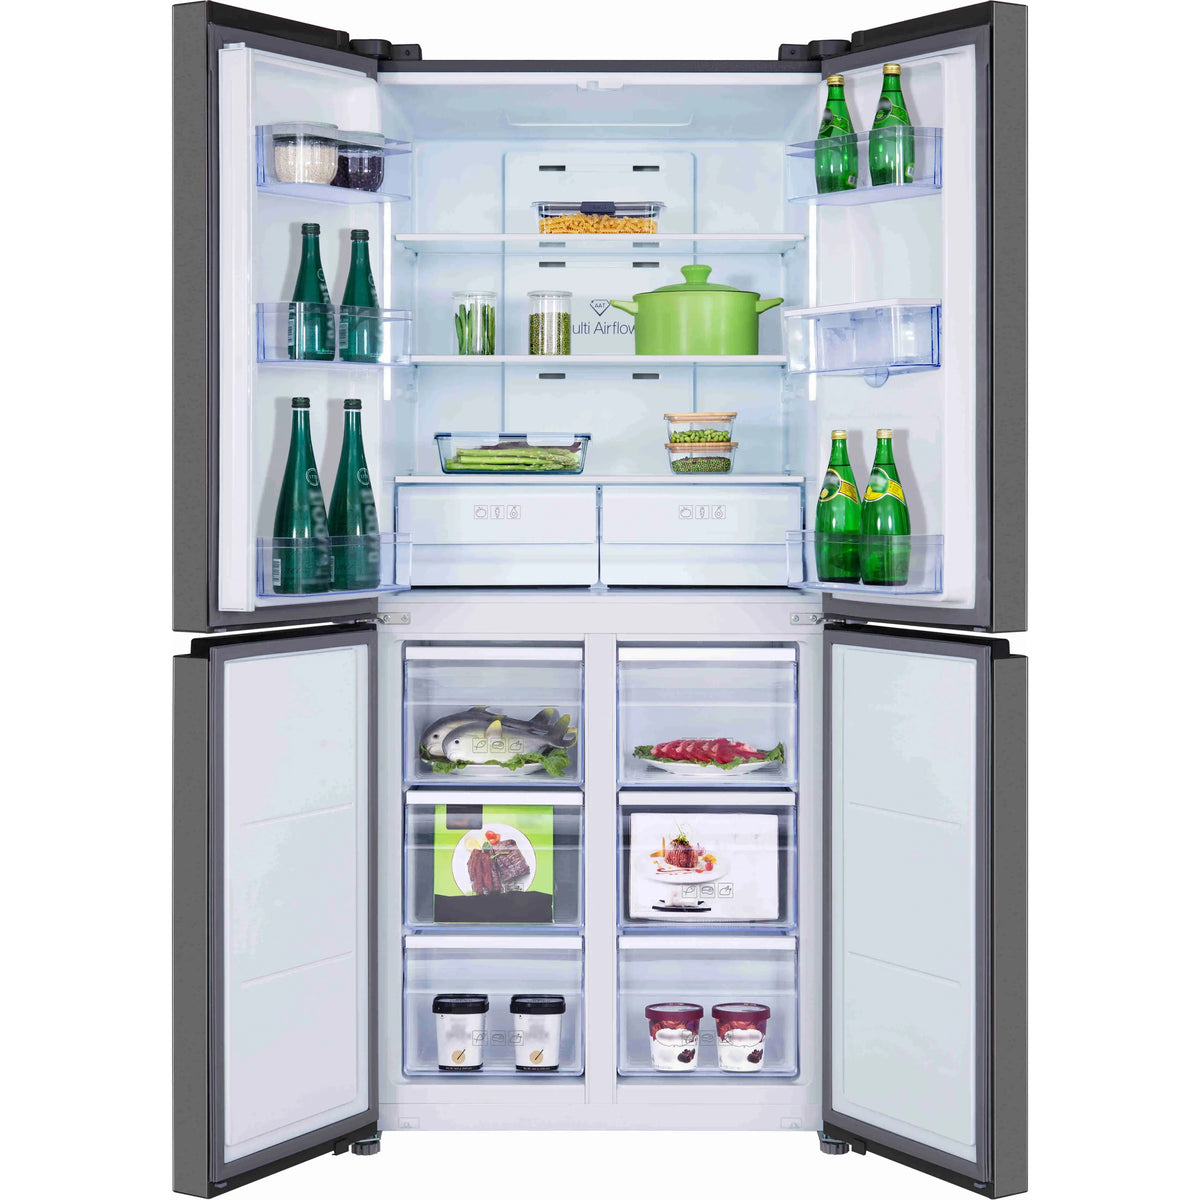 TCL 466L No Frost Non plumbed water dispenser American Style Fridge Freezer - Inox | RP466CSF0UK from TCL - DID Electrical